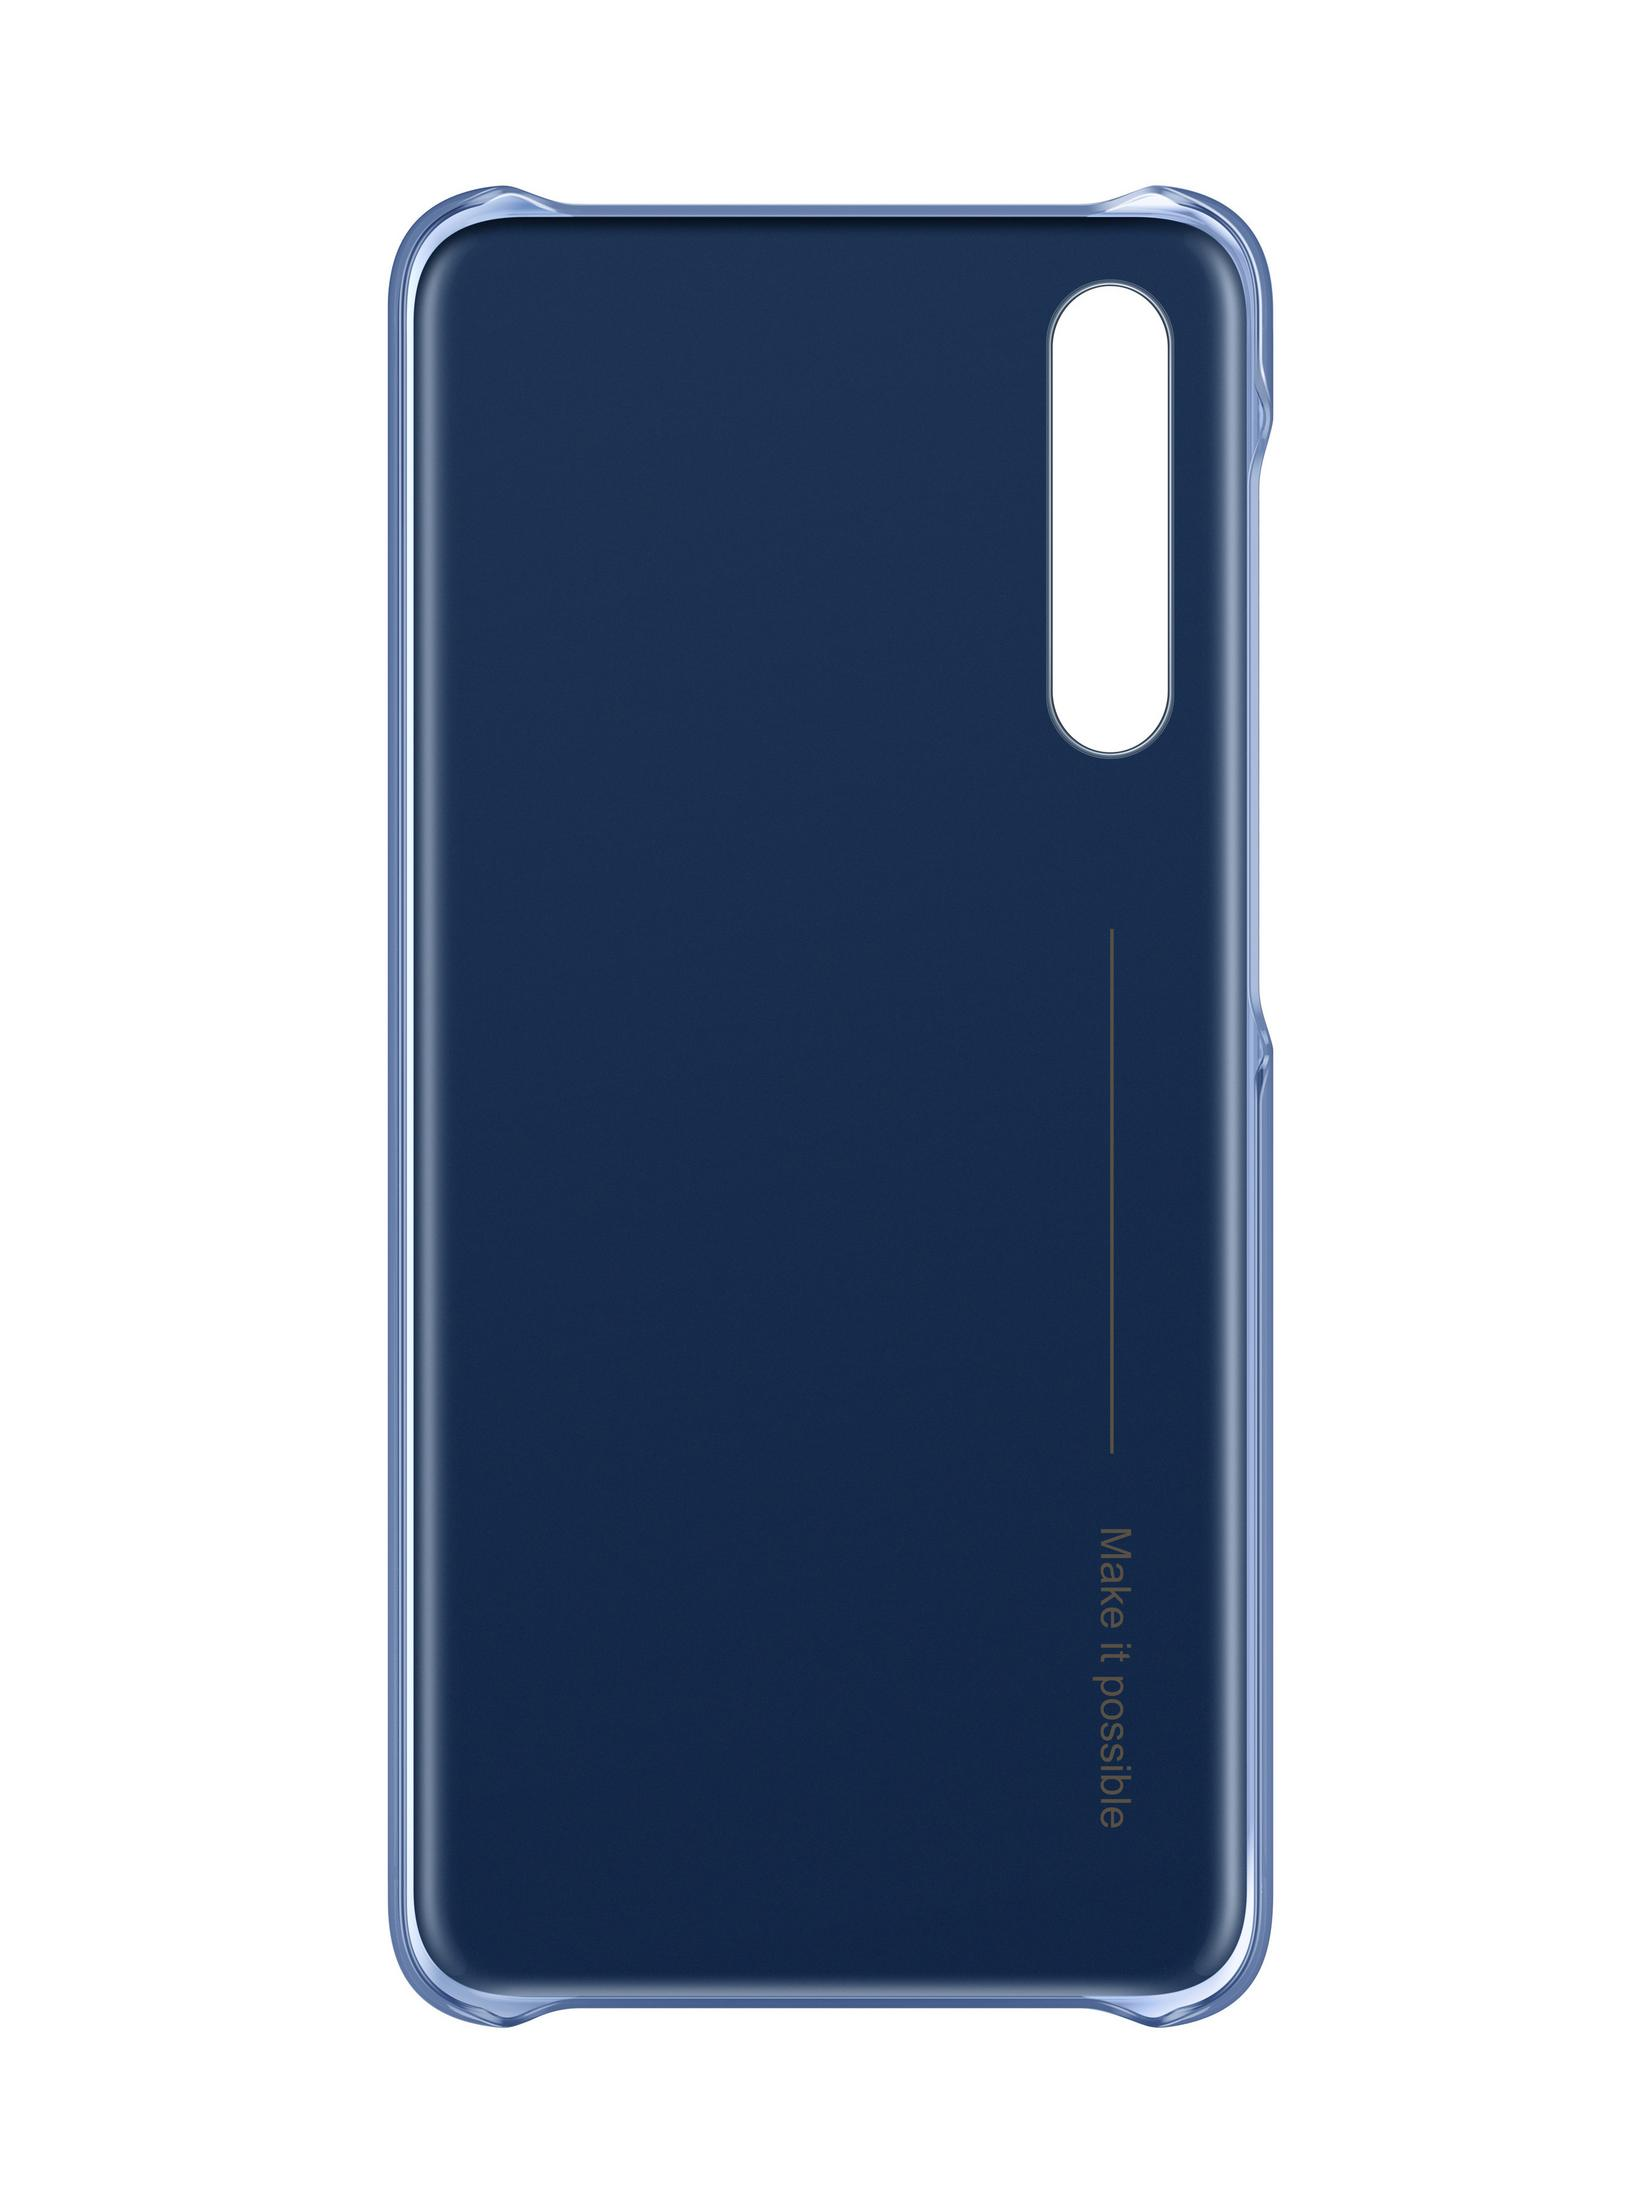 Cover, P20 Universal, blue, Universal, HUAWEI Protective Blue, Full Pro Cover Translucent